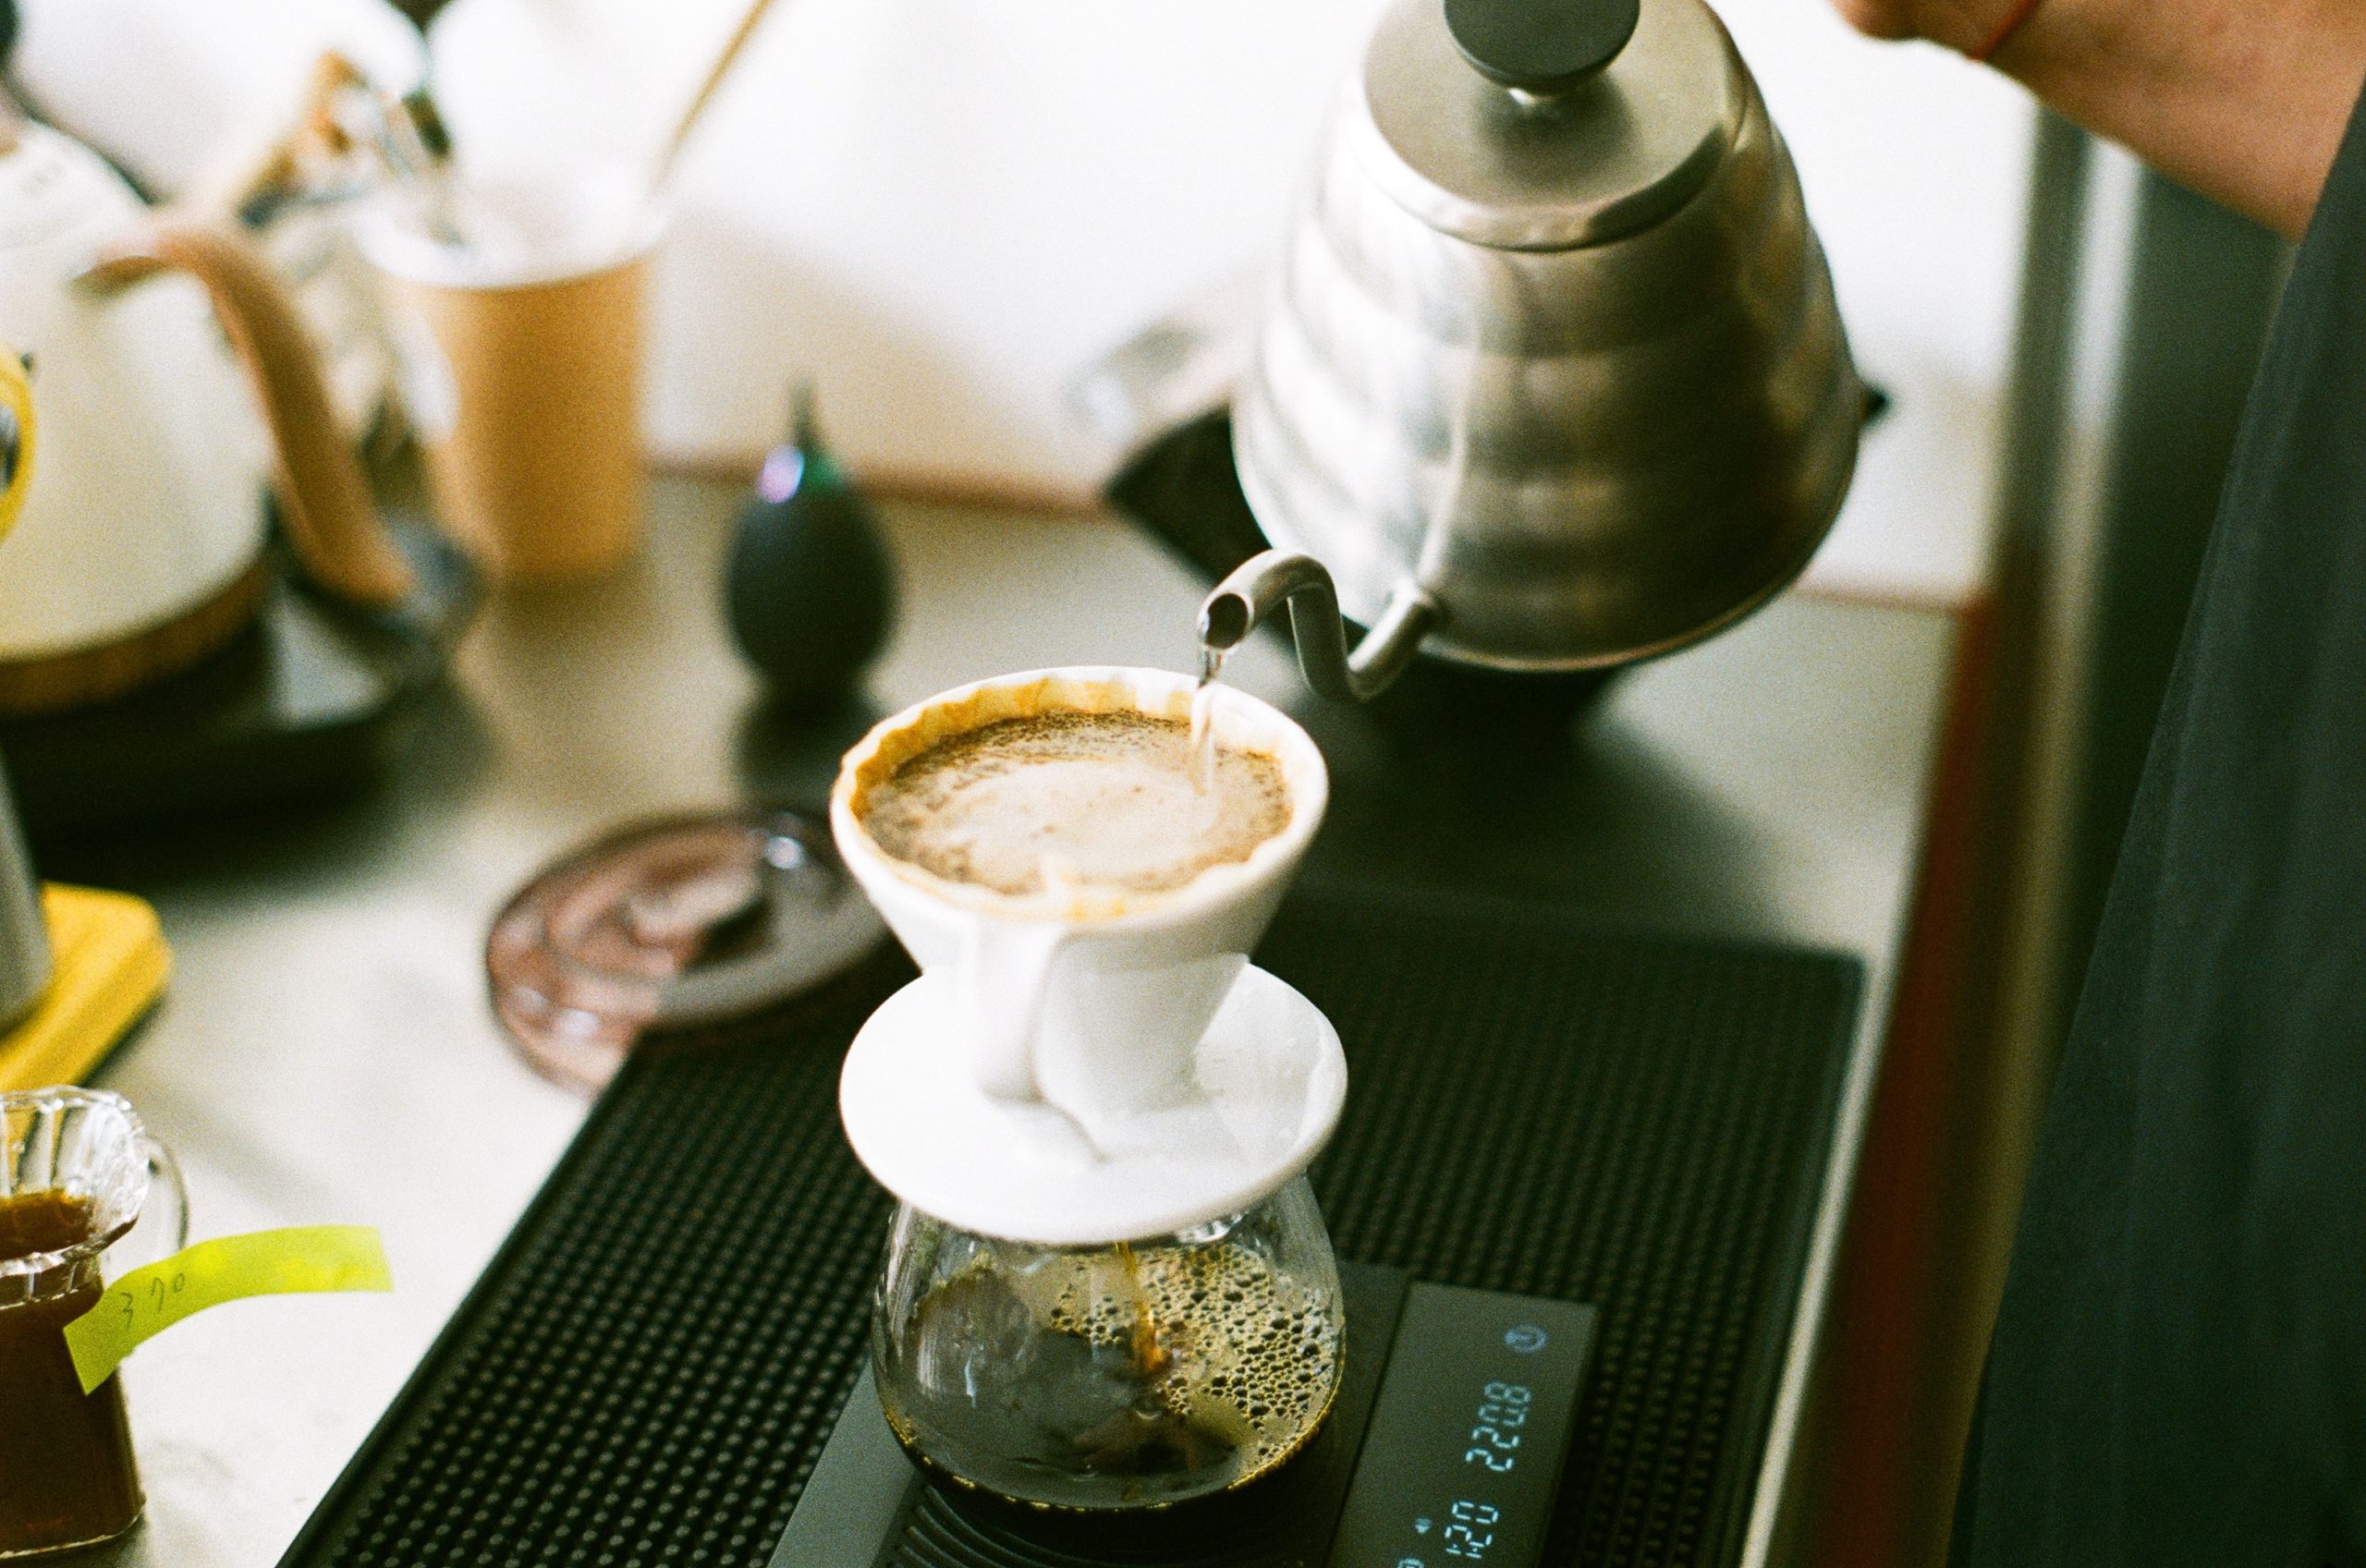 How to brew excellent coffee at home